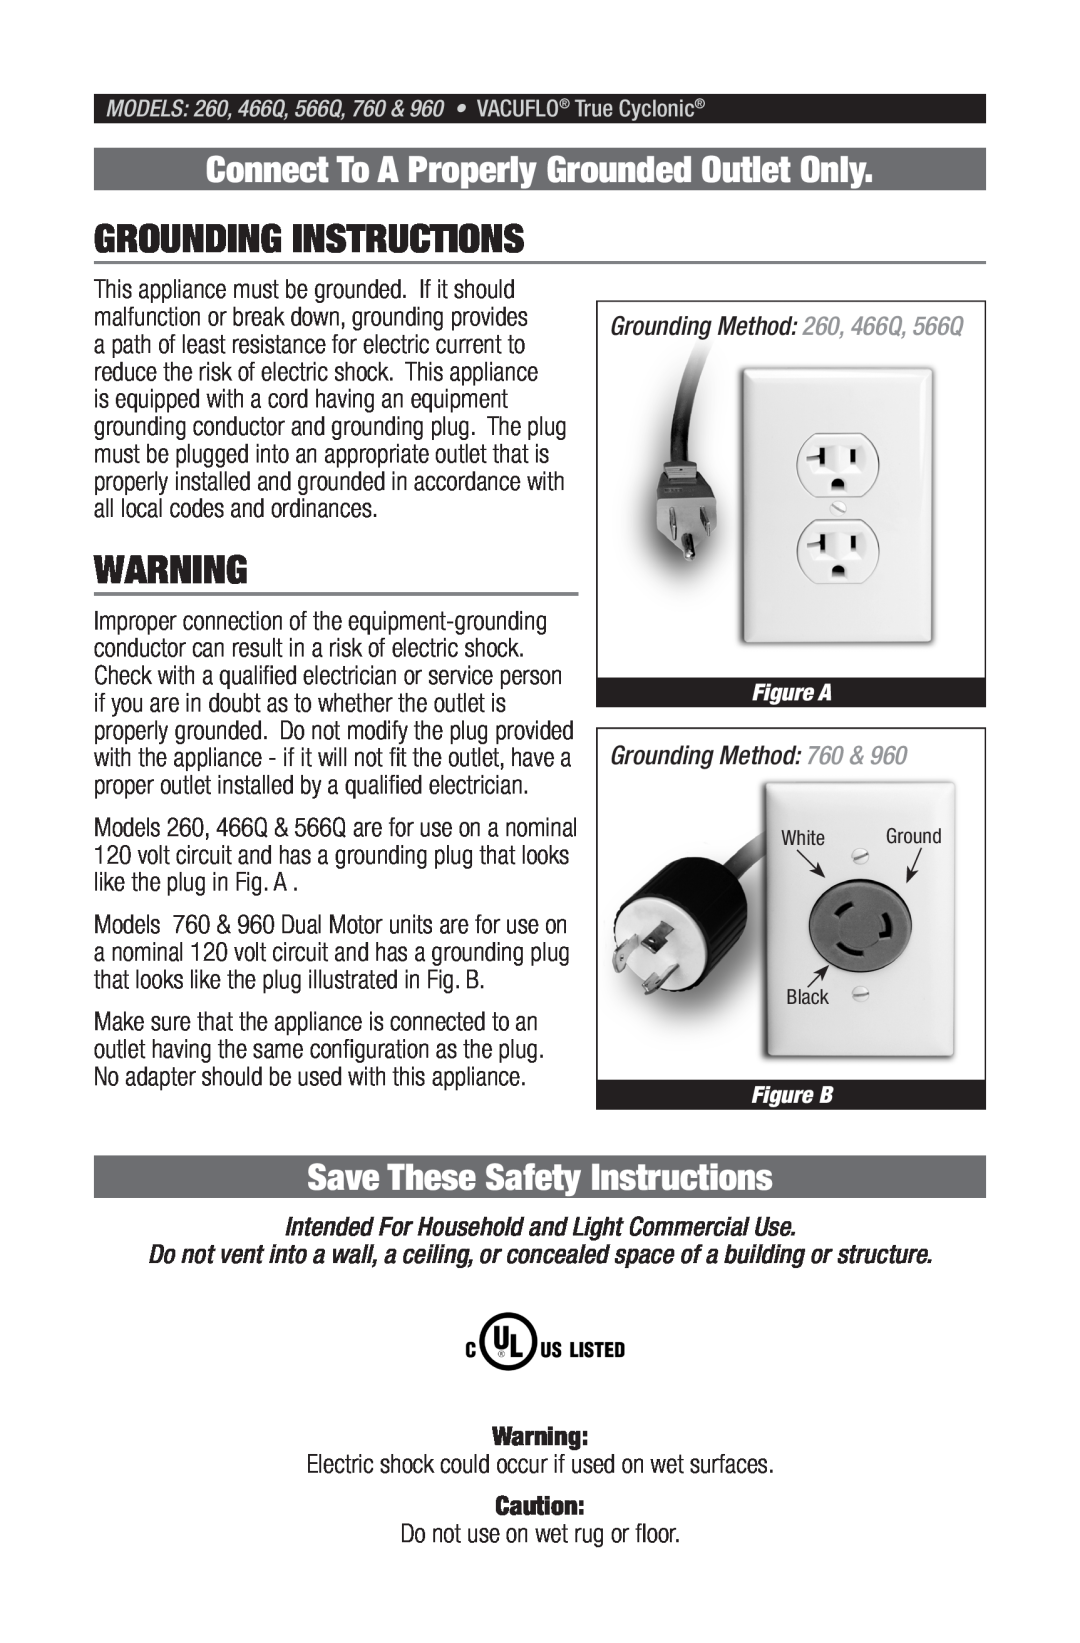 Vacuflo 466Q Grounding Instructions, Connect To A Properly Grounded Outlet Only, Save These Safety Instructions, Figure A 